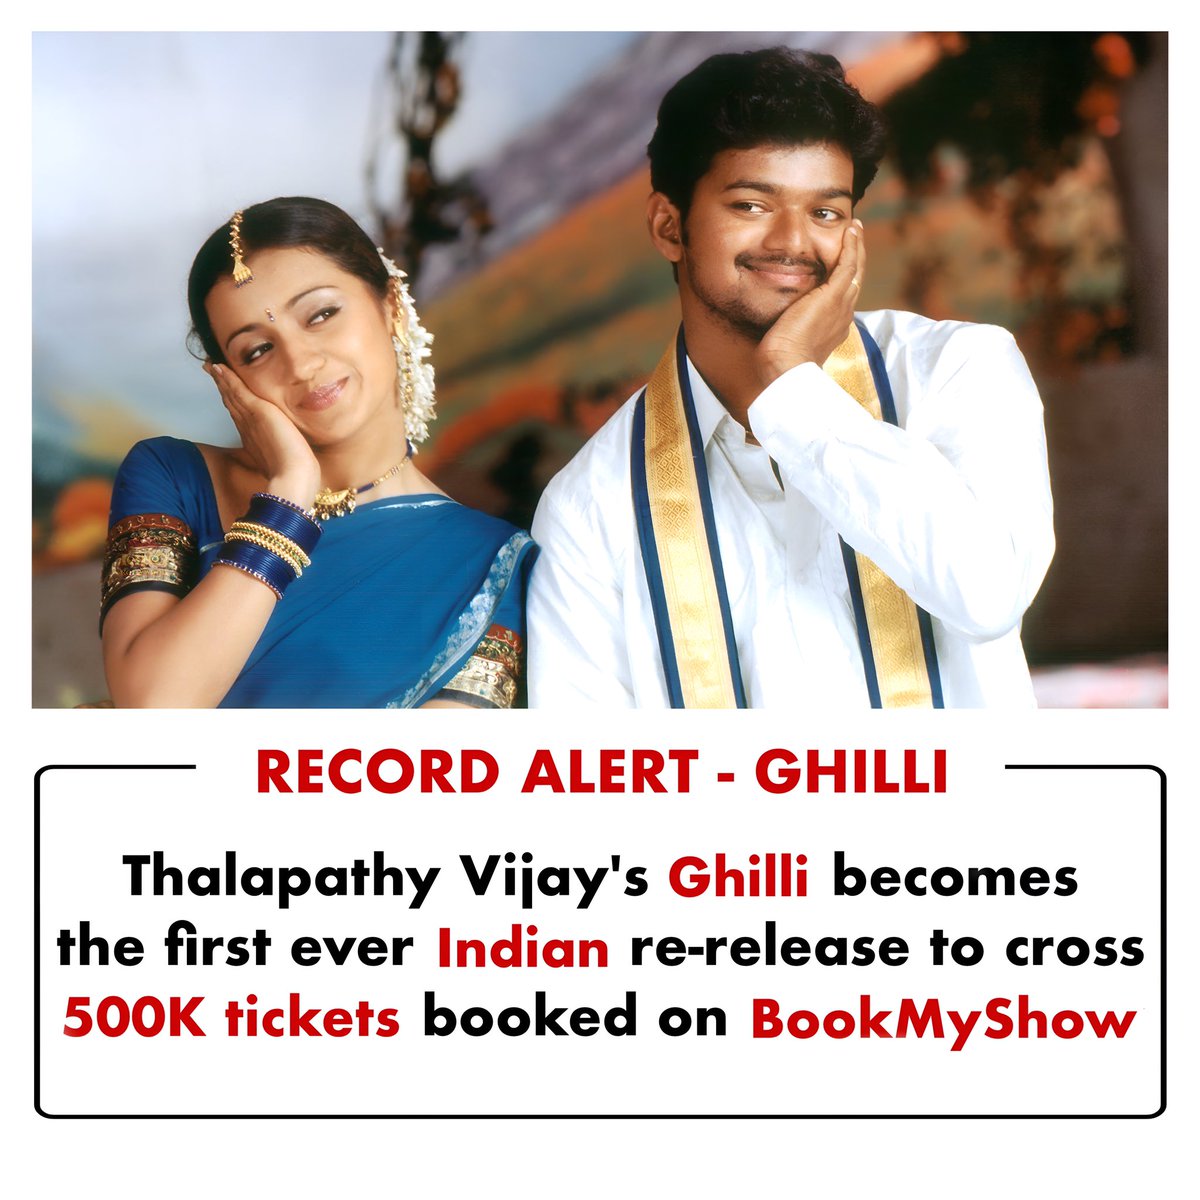 Record alert : With more than 510K tickets booked till now #Ghilli creates a massive record in Indian cinema history 😎